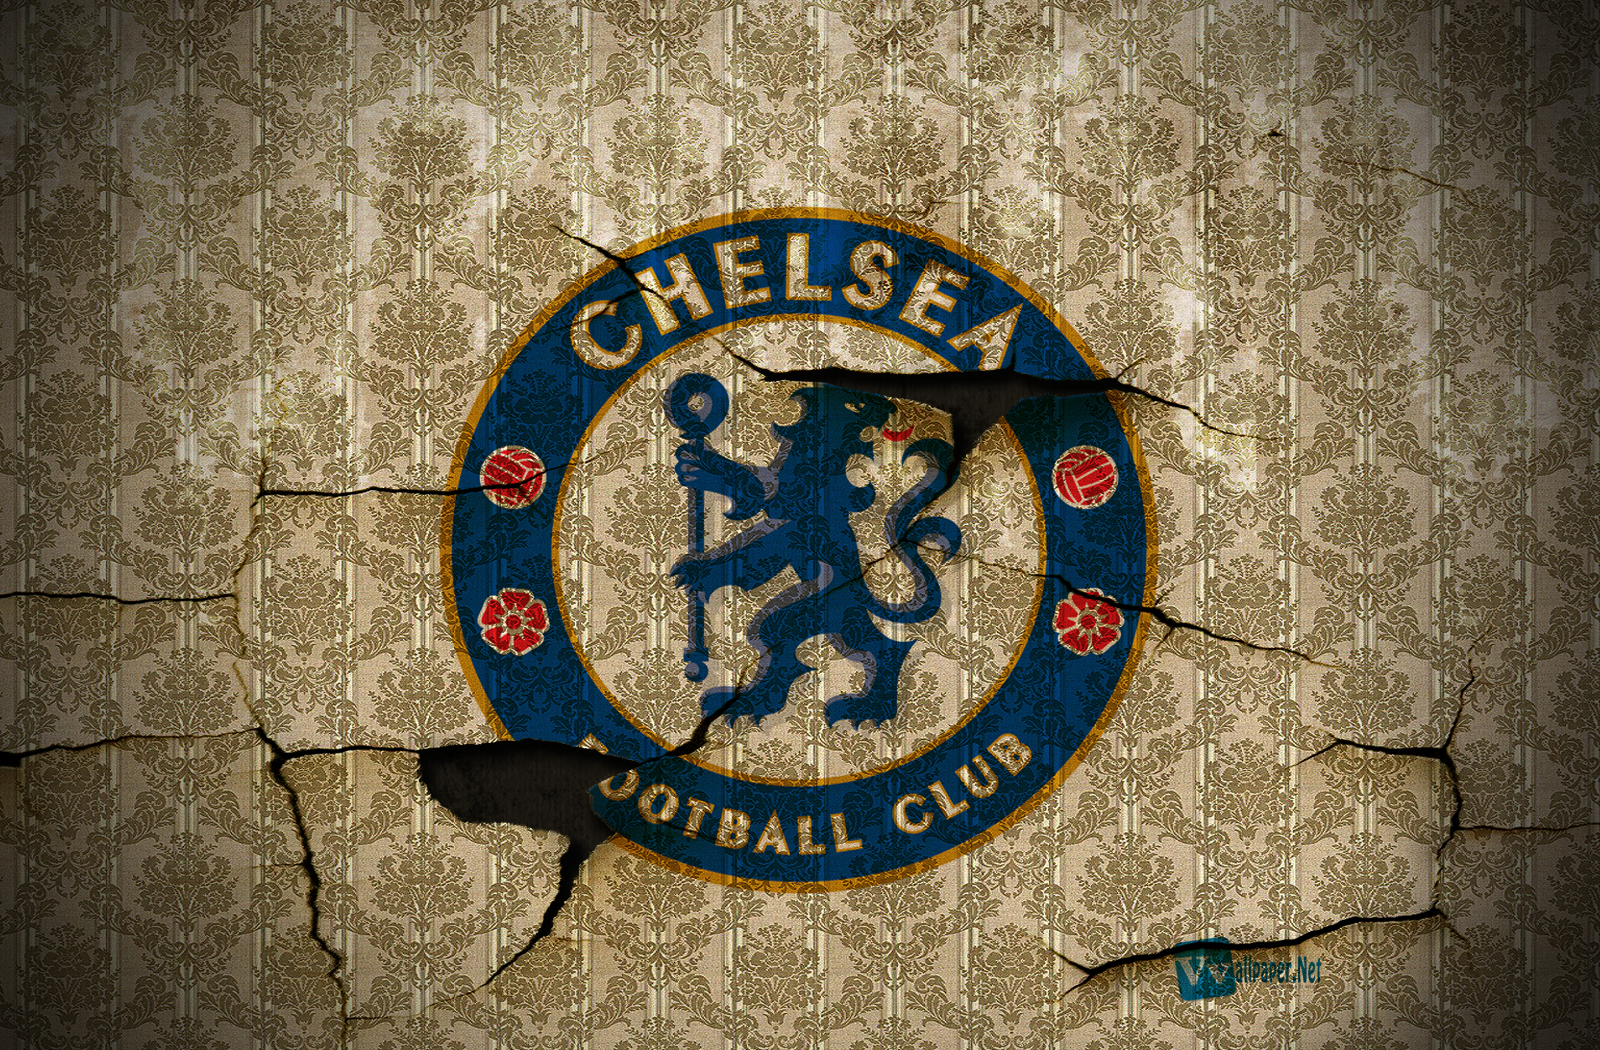 Chelsea Fc Wallpapers HD| HD Wallpapers ,Backgrounds ,Photos ,Pictures